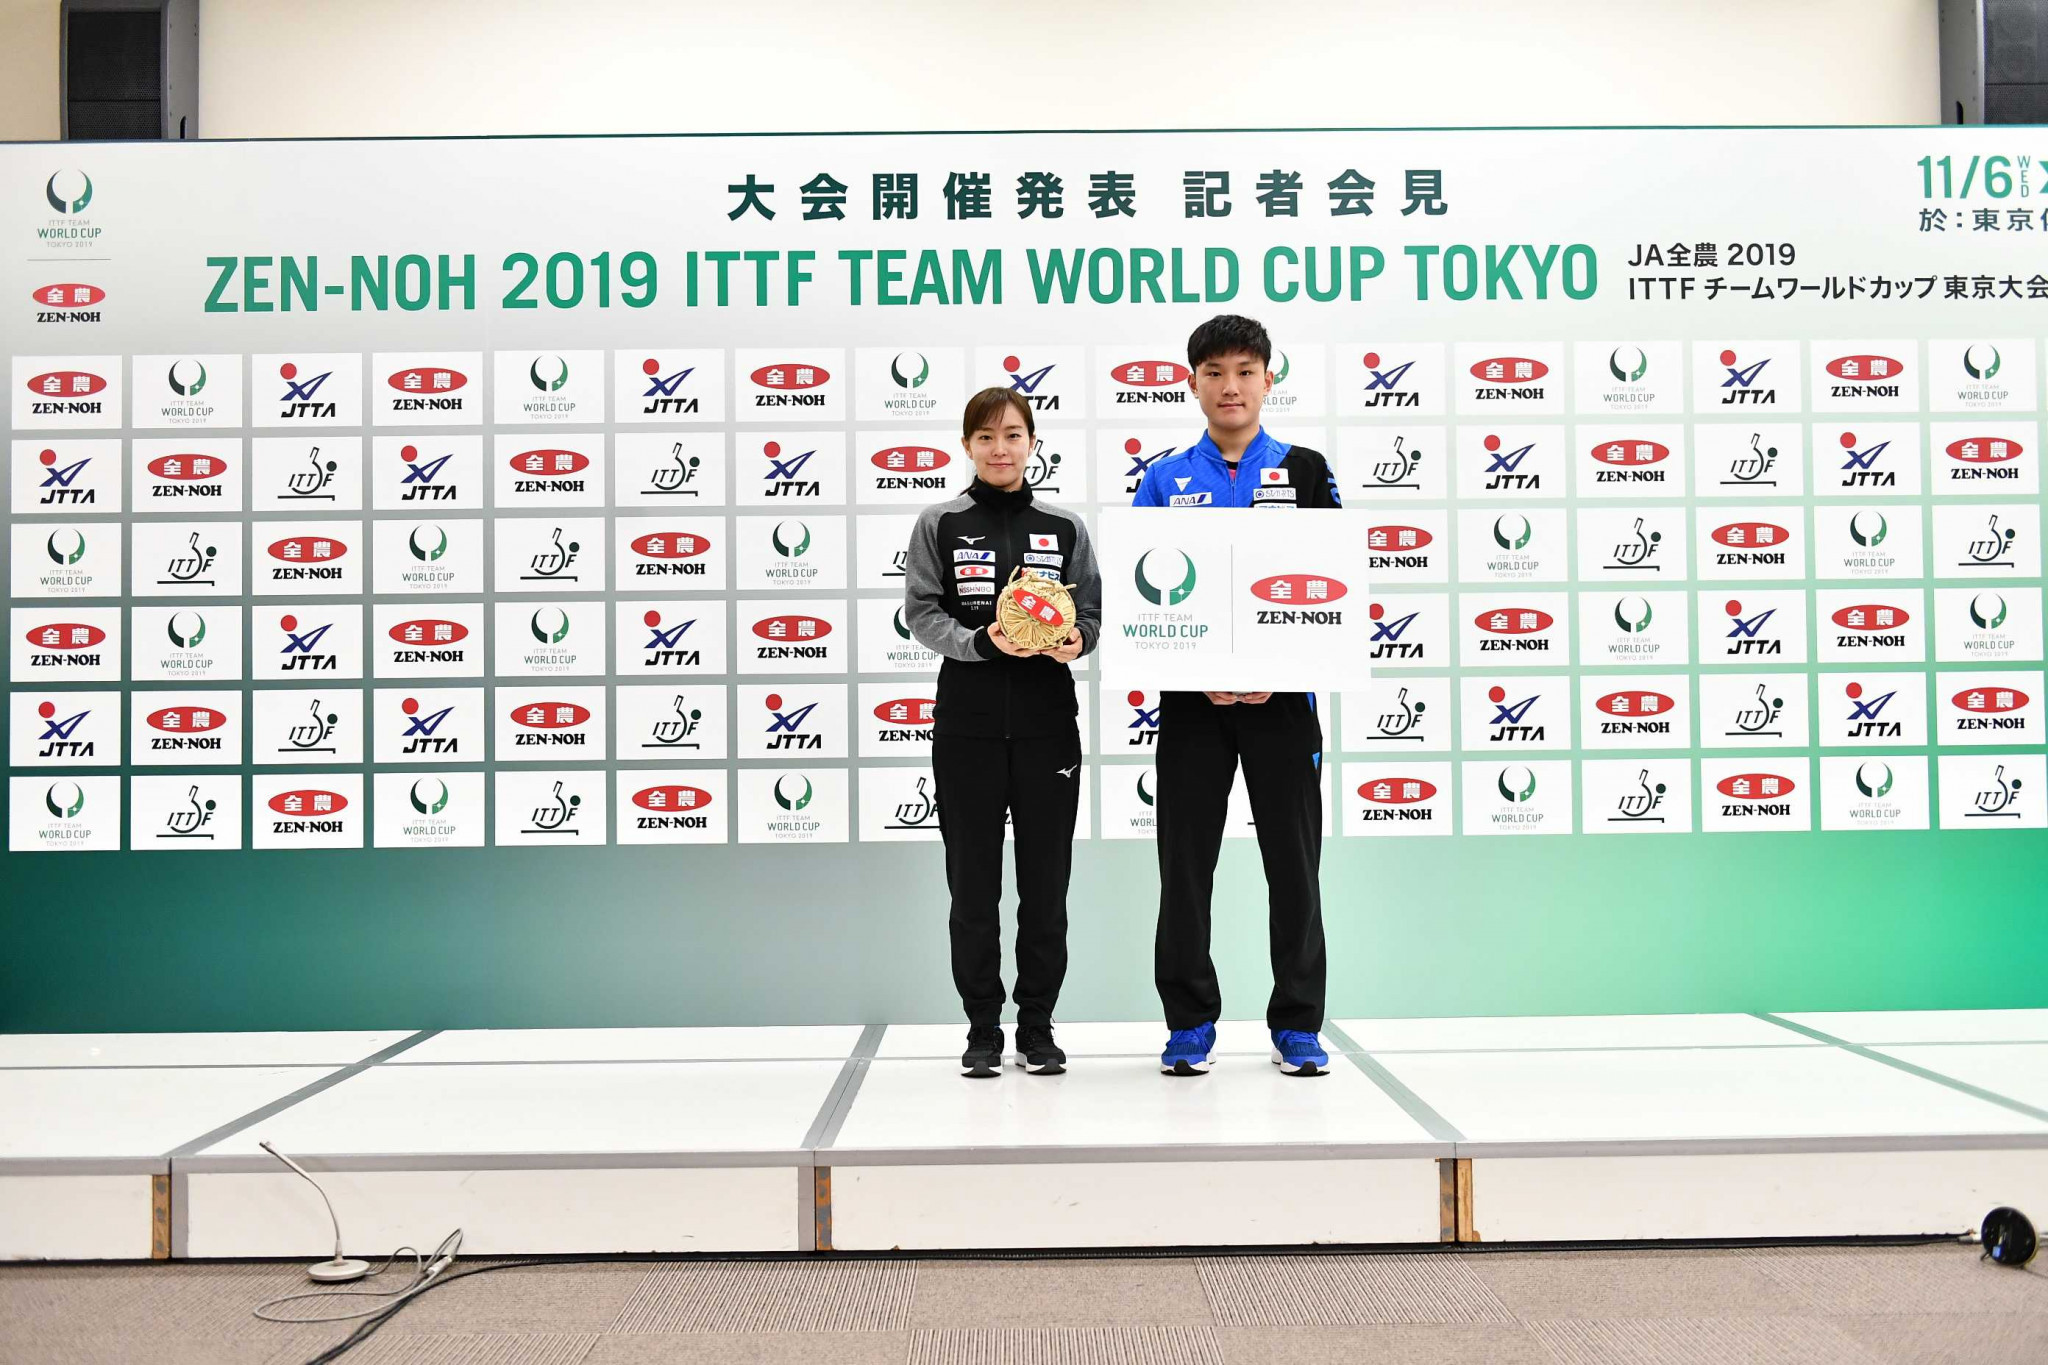 China out to maintain dominance at ITTF Team World Cup in Tokyo